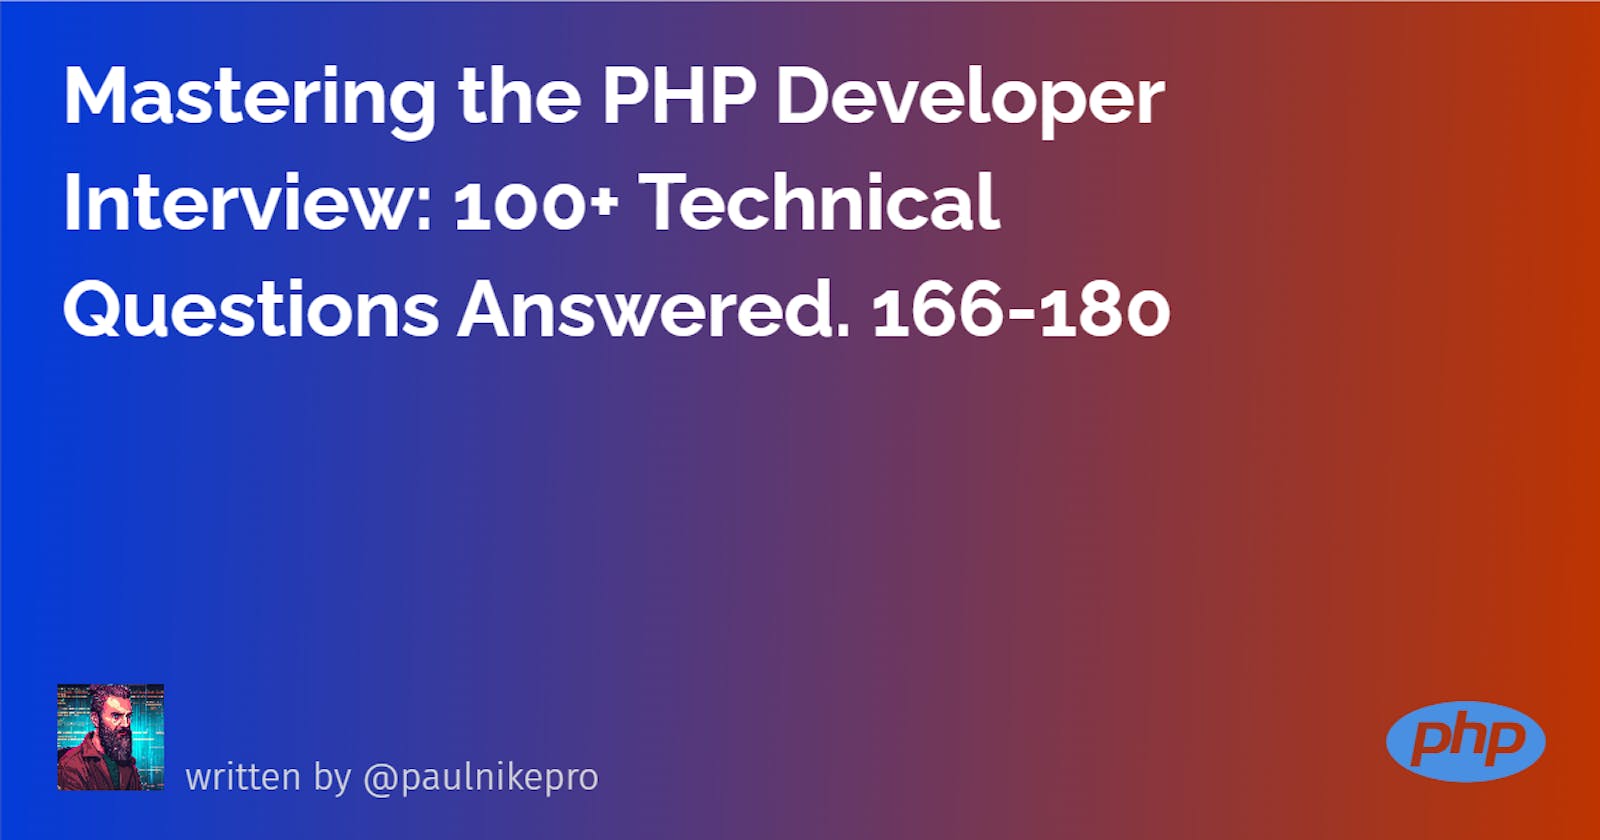 Mastering the PHP Developer Interview: 100+ Technical Questions Answered. 166-180.